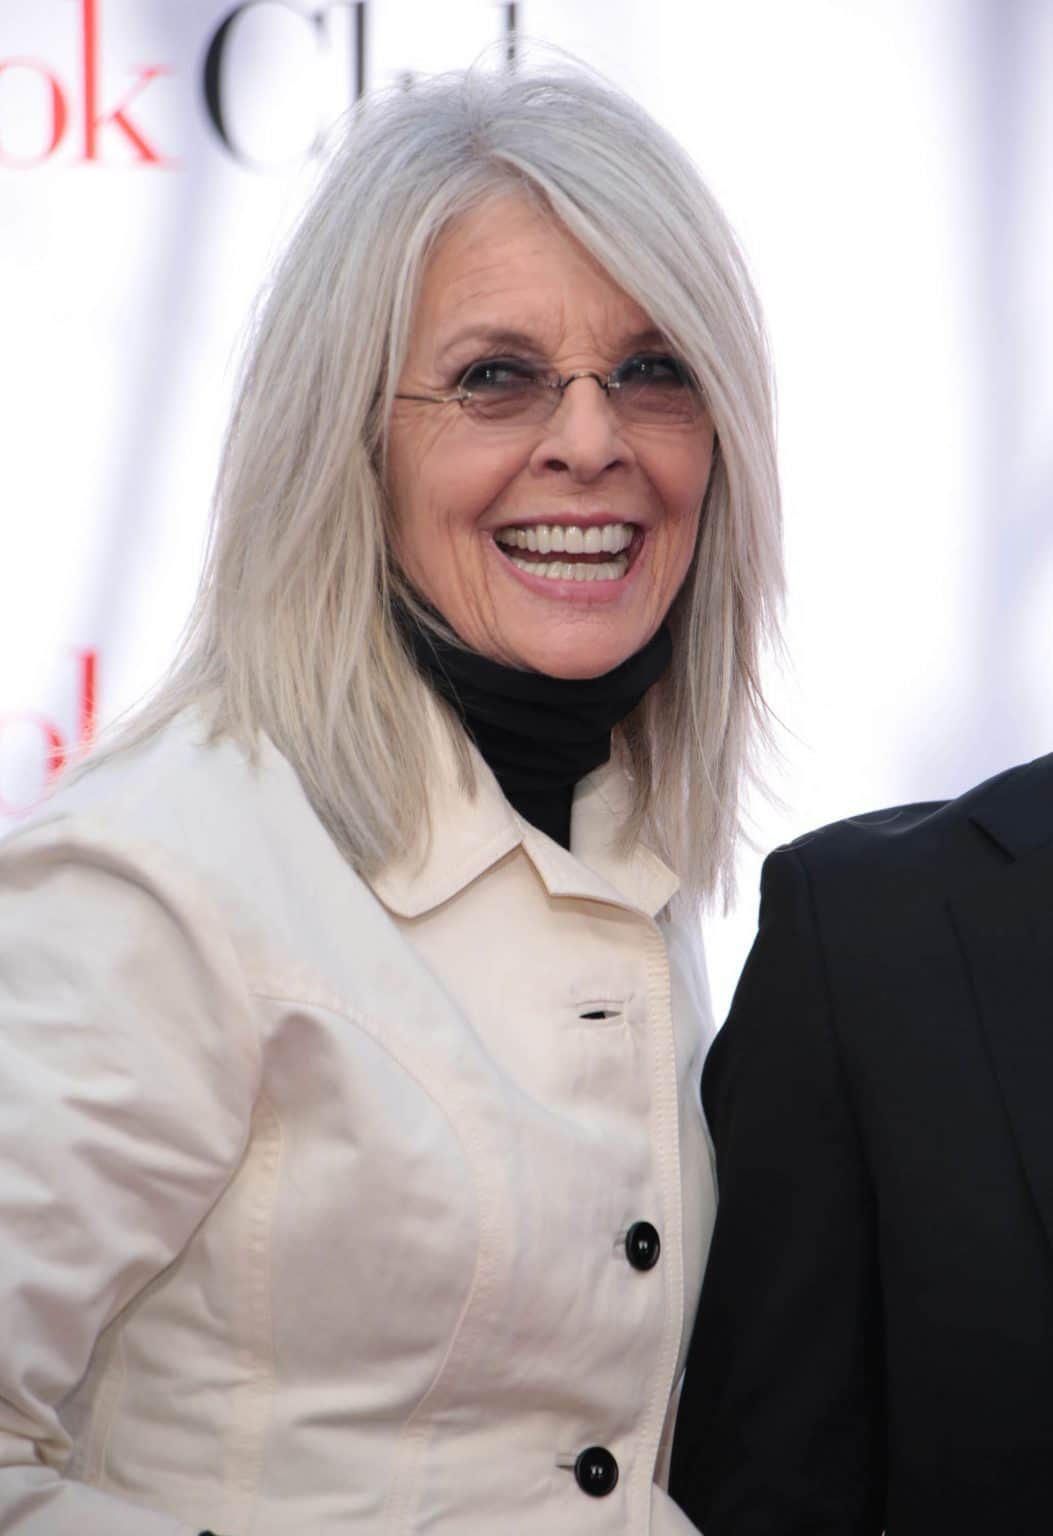 Diane Keaton Turns Heads In ThighHigh Snakeskin Boots On Set For New Film